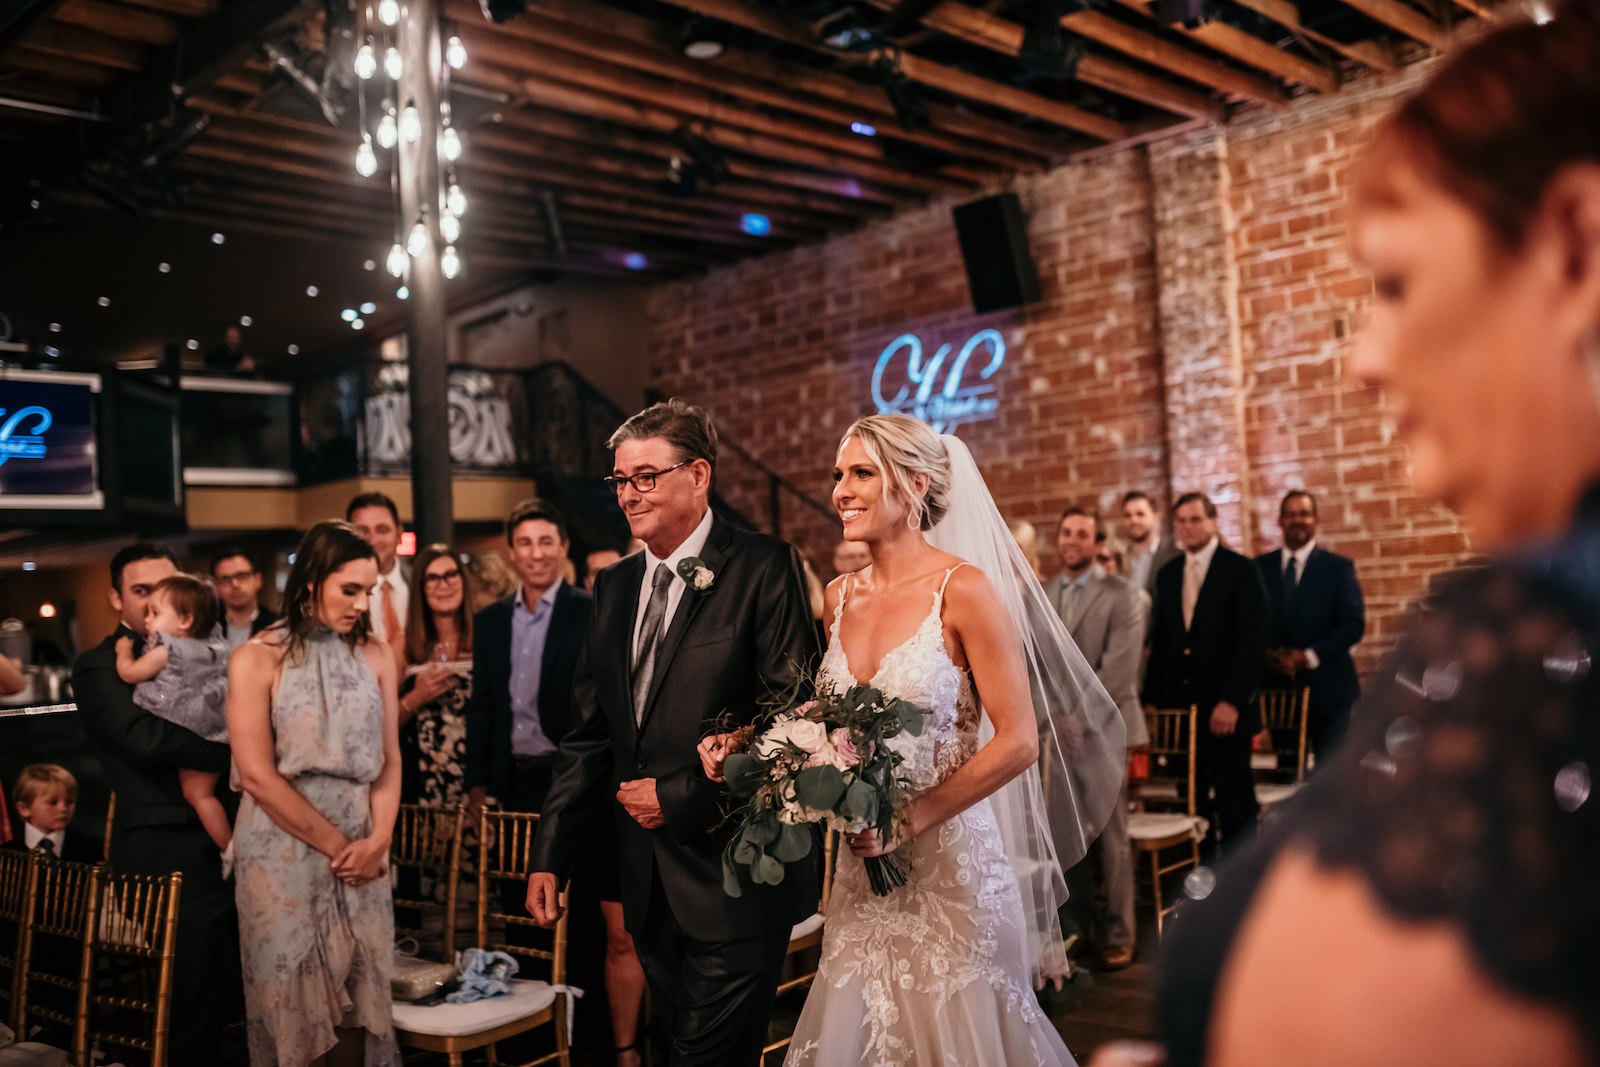 Florida Bride and Father Walk Down the Aisle During Indoor Wedding Ceremony, Interior Summer Ceremony with Exposed Red Brick Wall and String Lighting | Historic Tampa Bay Wedding Venue NOVA 535 in Downtown St. Petersburg